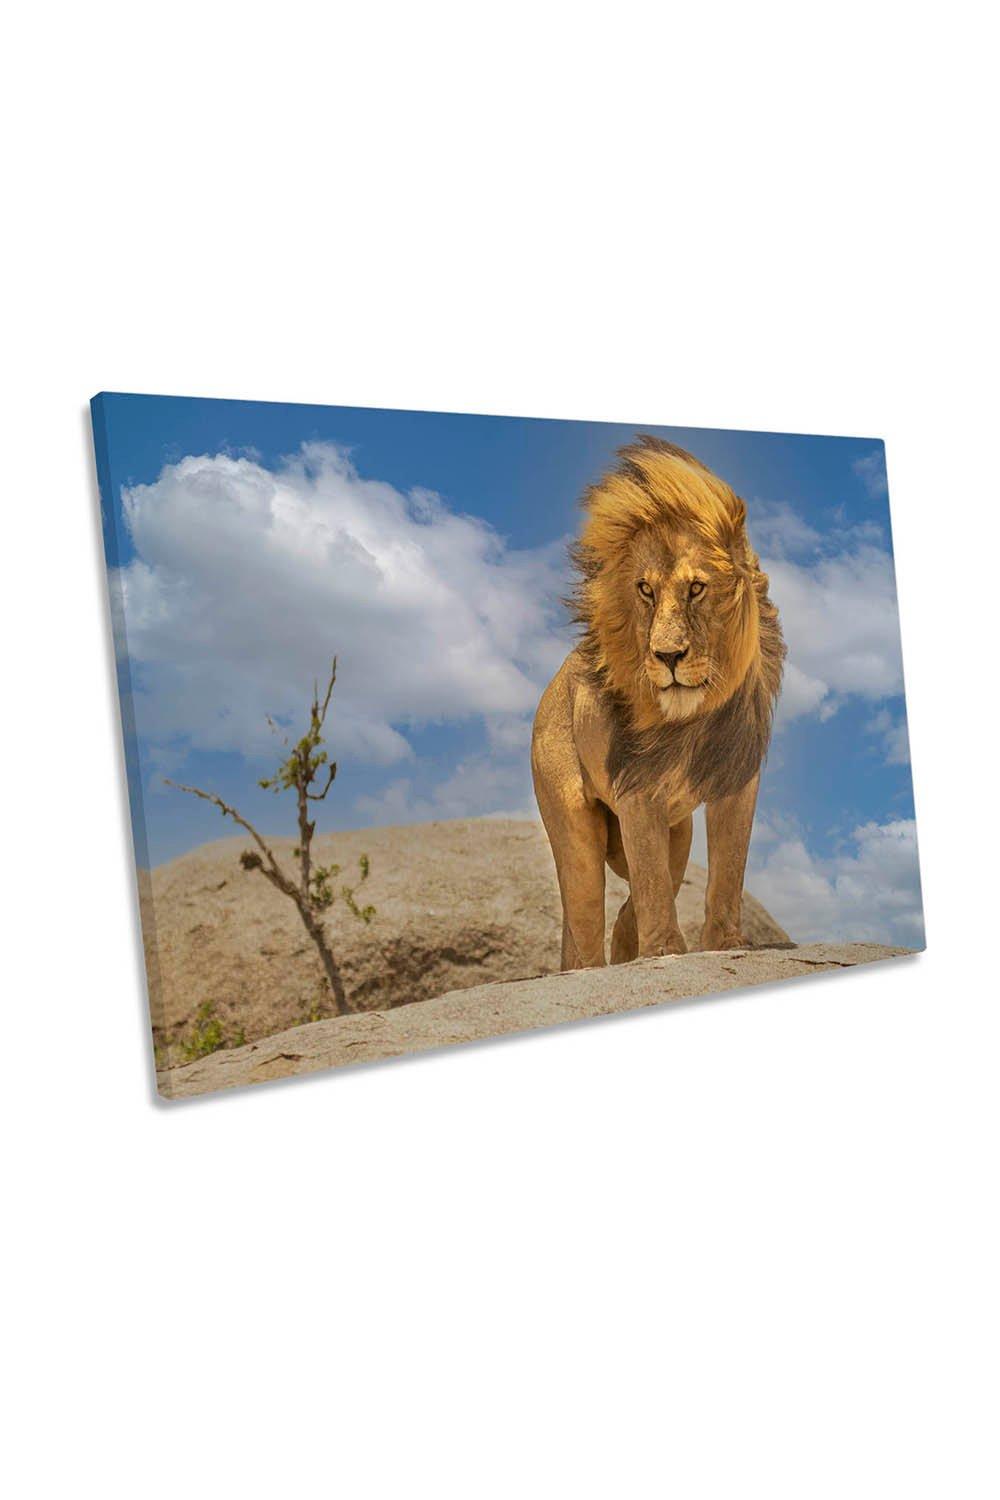 The Lion King Wildlife Animal Canvas Wall Art Picture Print